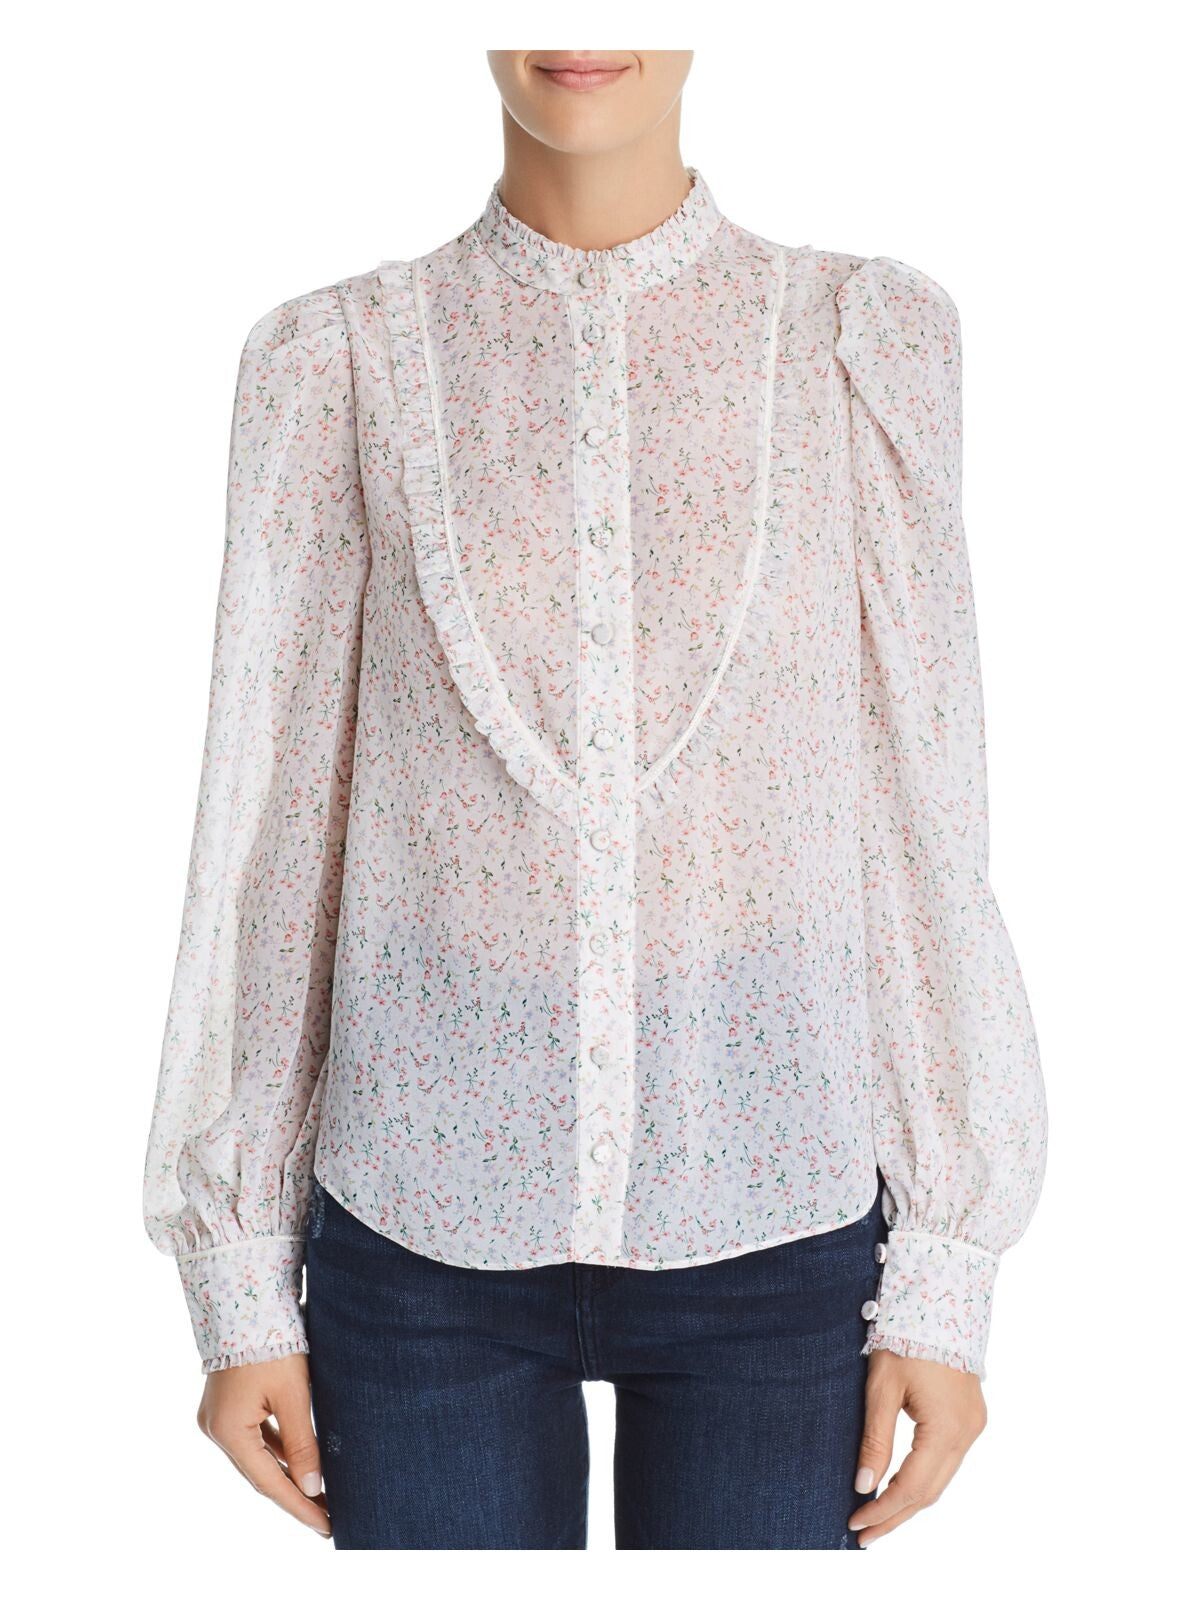 DIVINE HERITAGE Womens White Floral Long Sleeve Button Up Top Size: XS